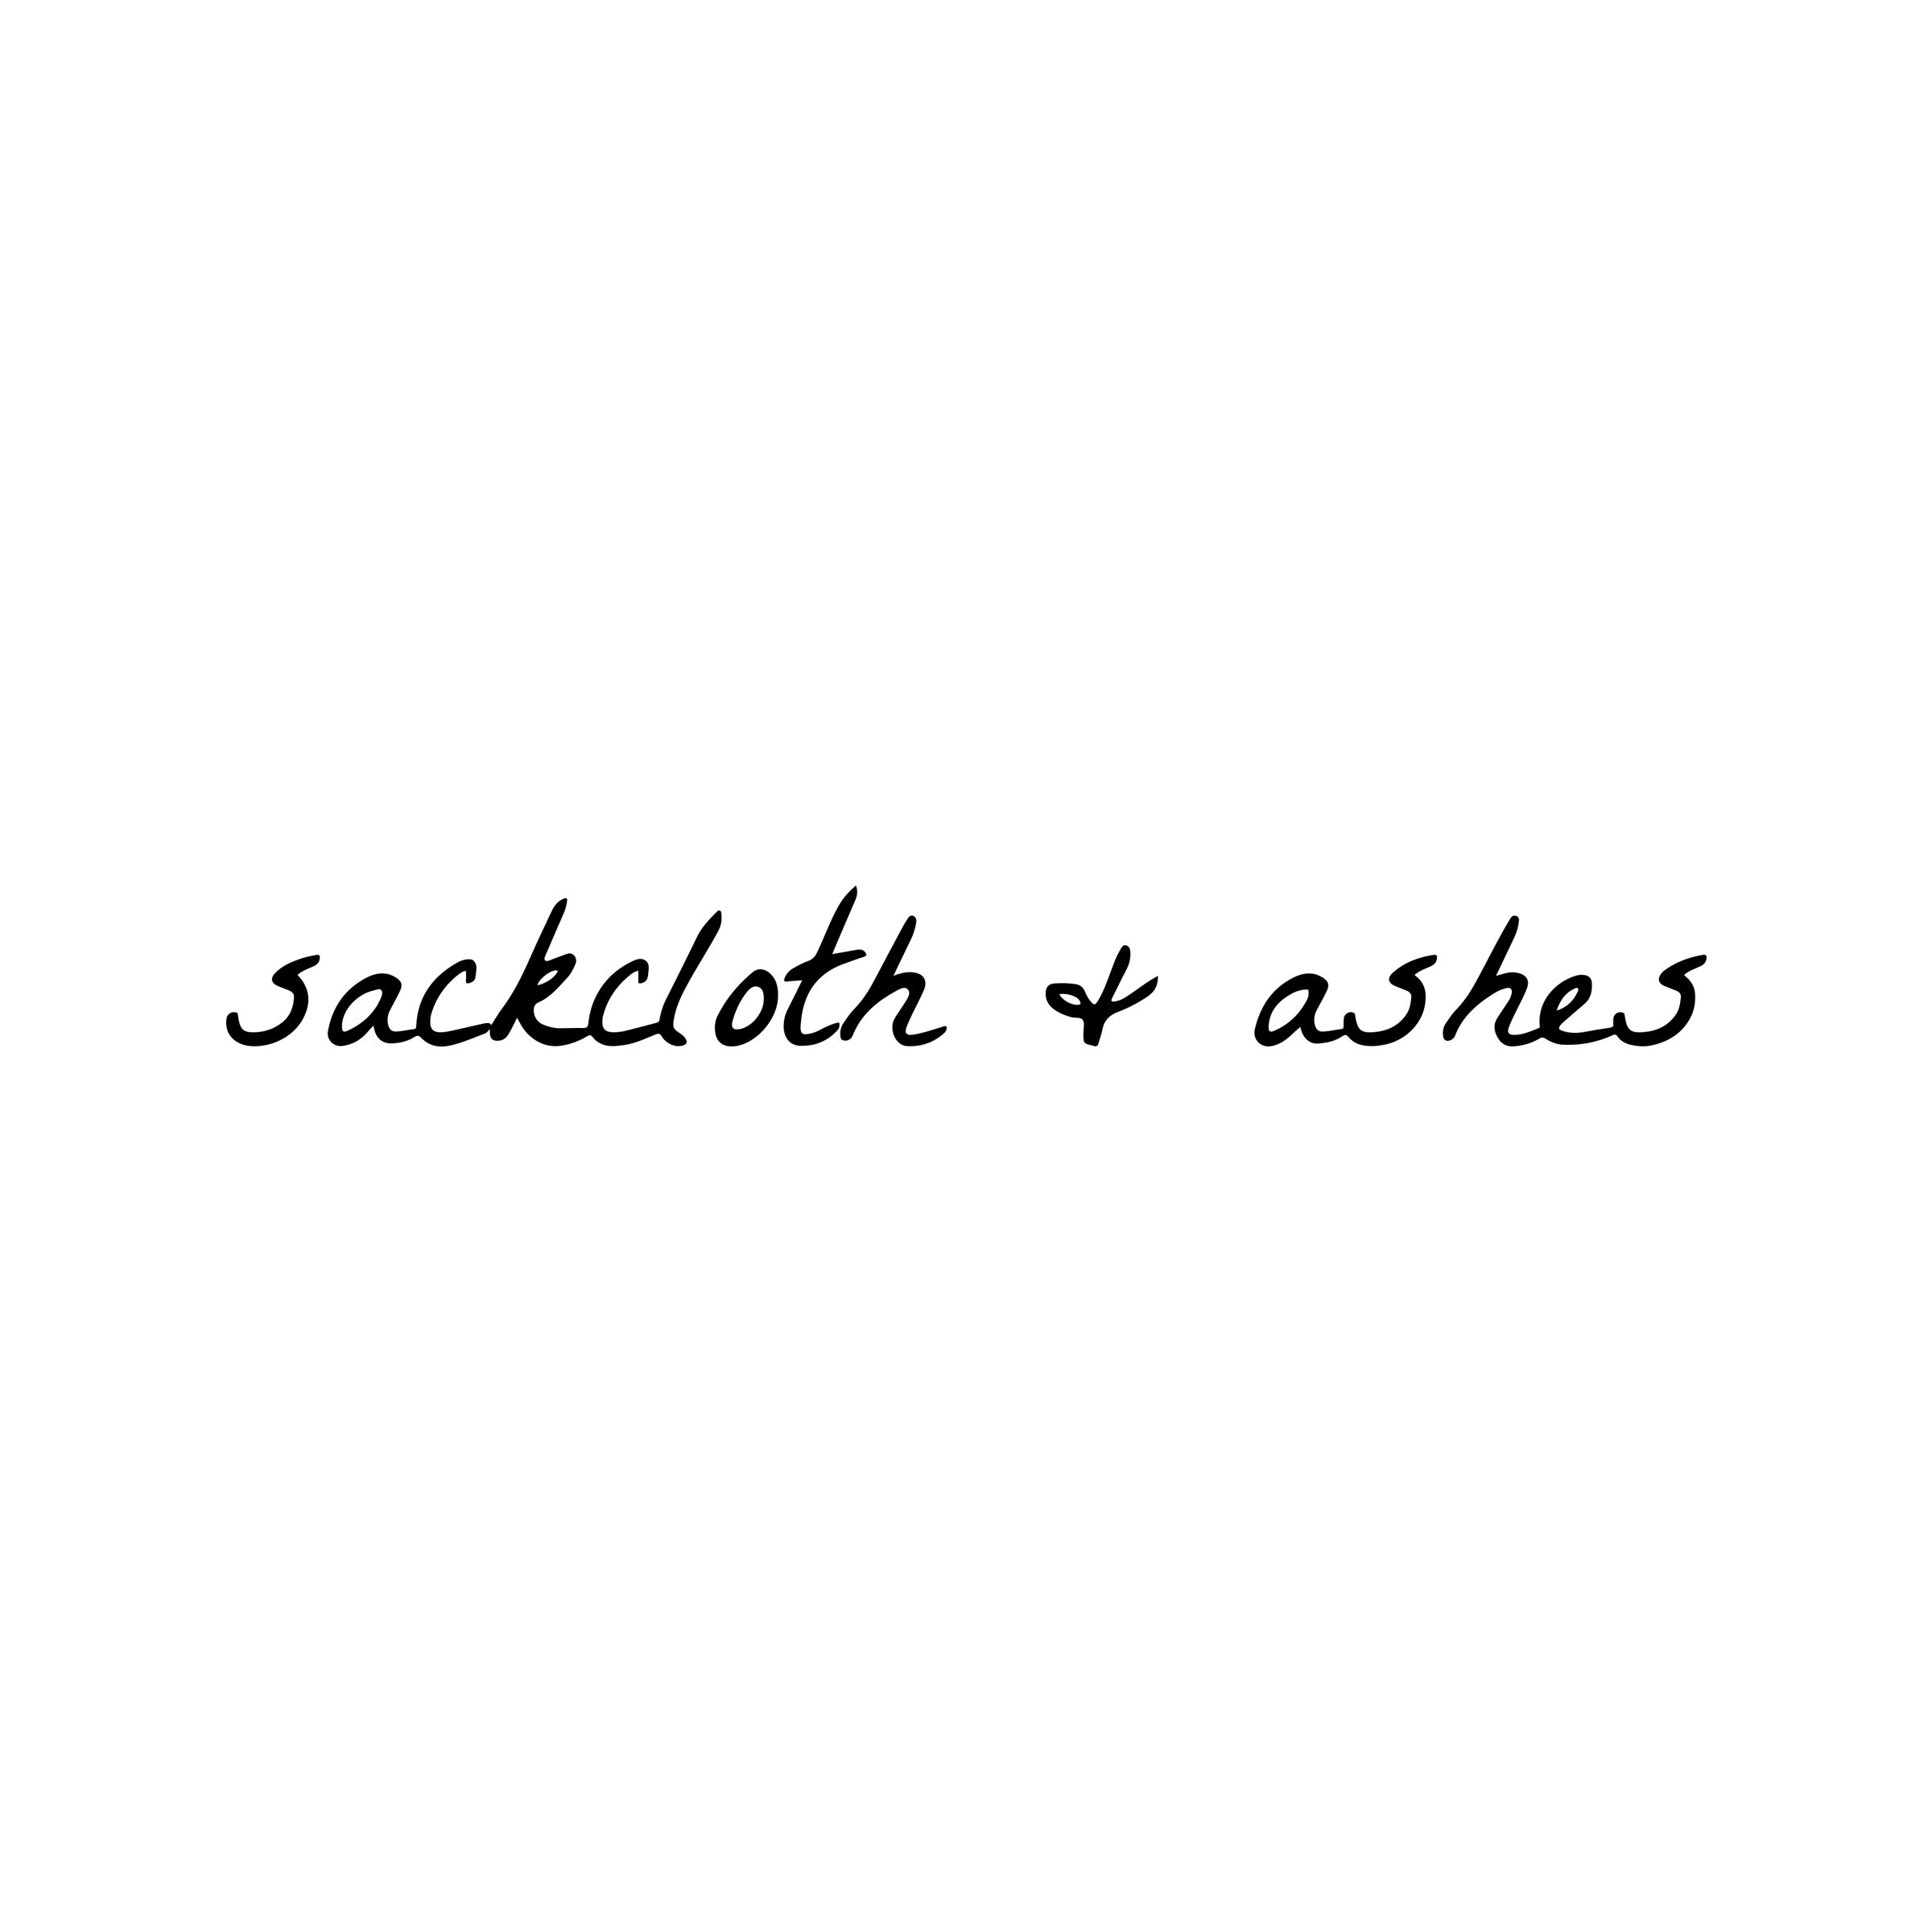 sackcloth and ashes logo